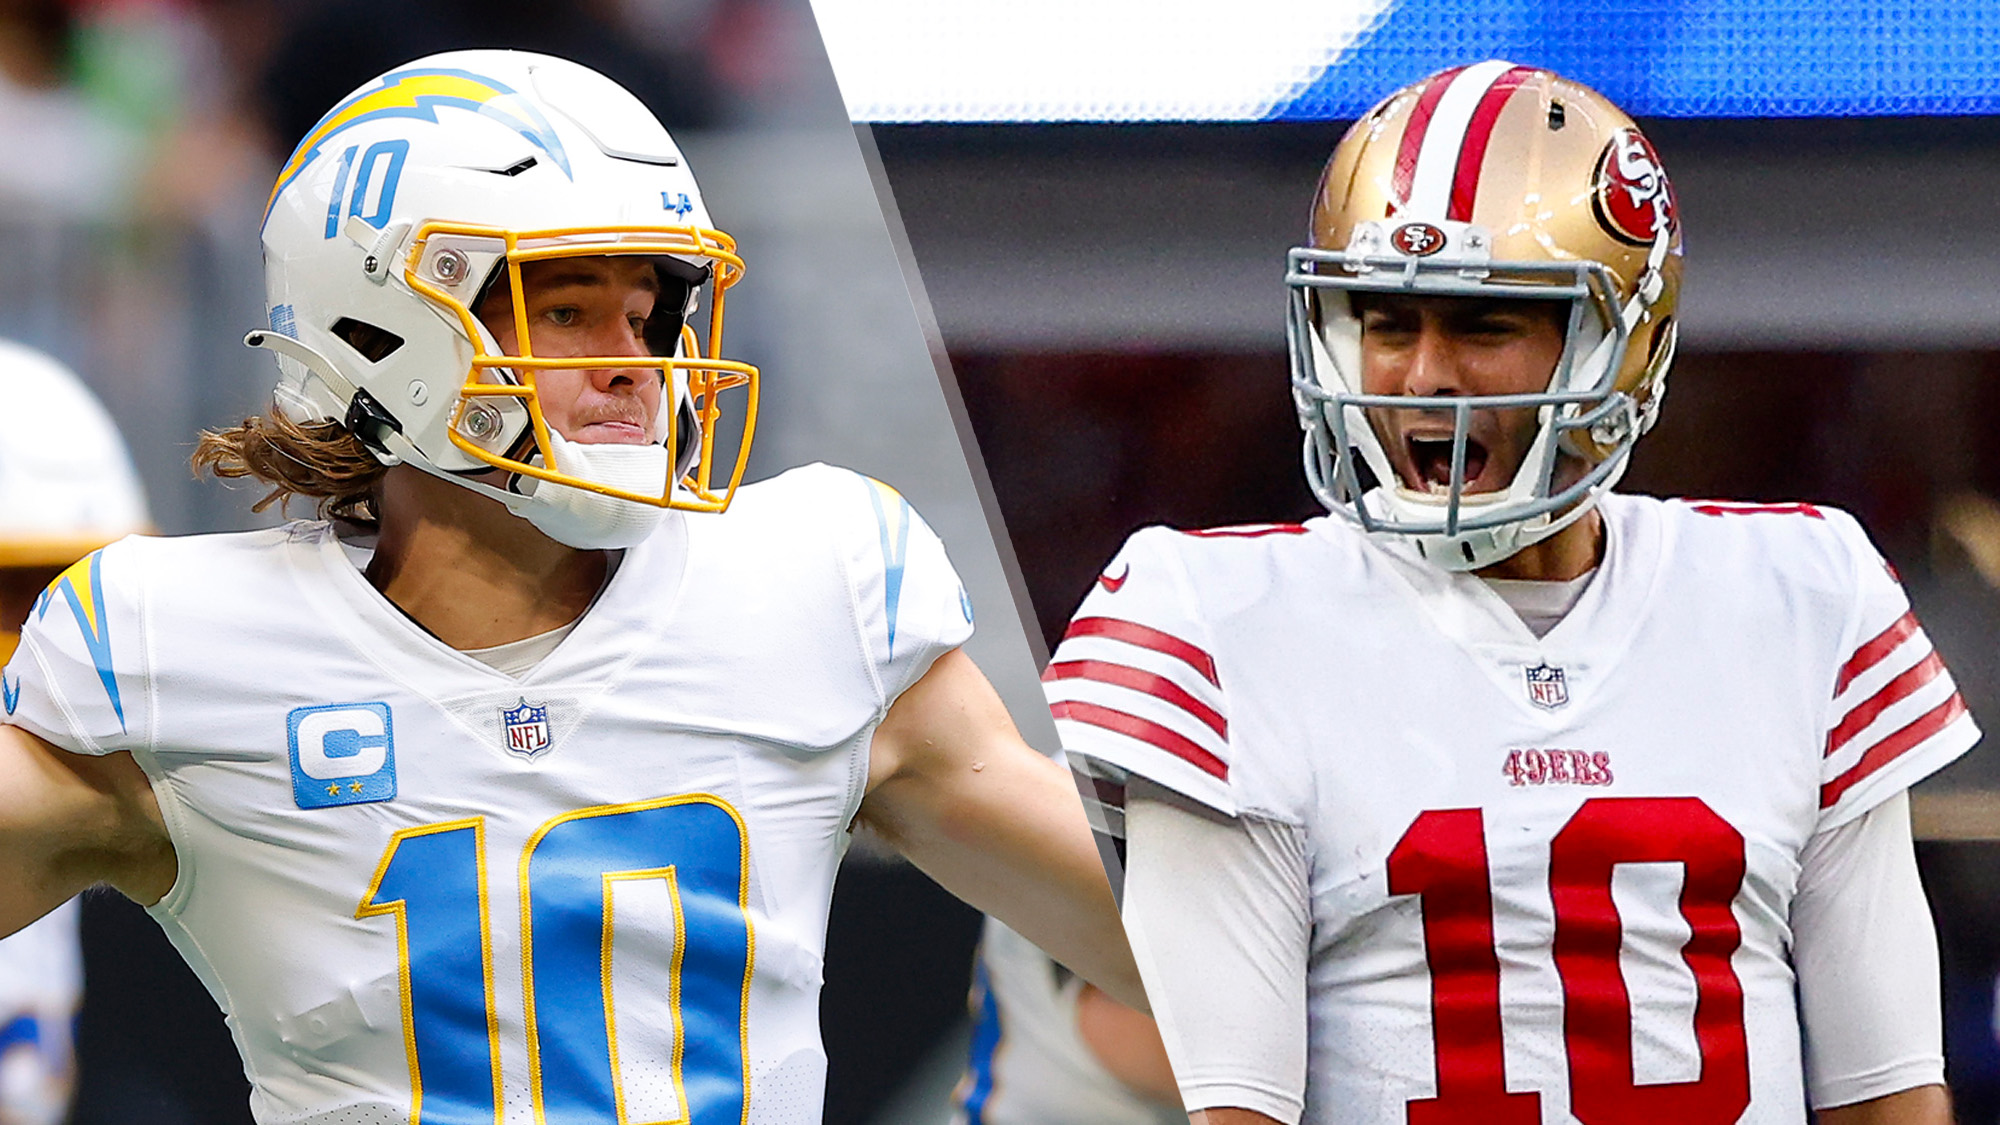 chargers vs 49ers live streaming free